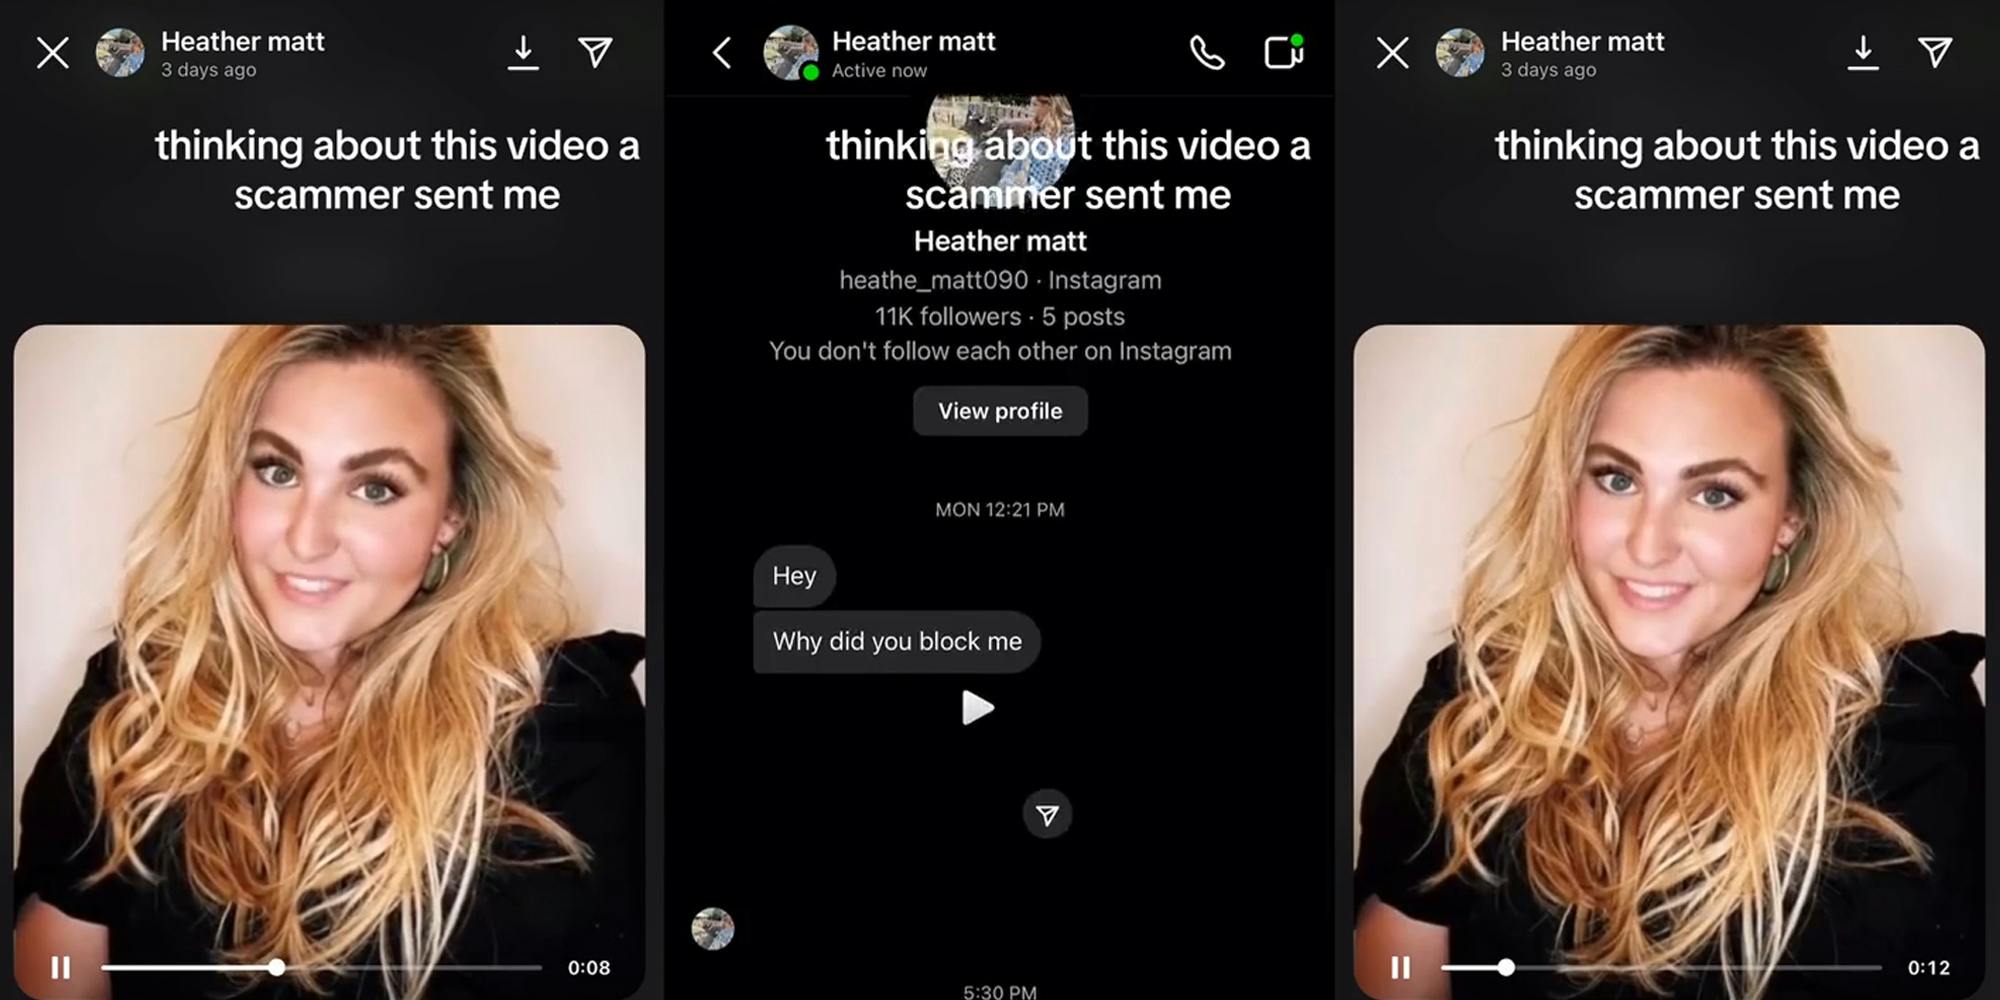 Instagram DM video with caption "thinking about this video a scammer sent me" (l) Instagram DM's with caption "thinking about this video a scammer sent me" (c) Instagram DM video with caption "thinking about this video a scammer sent me" (r)